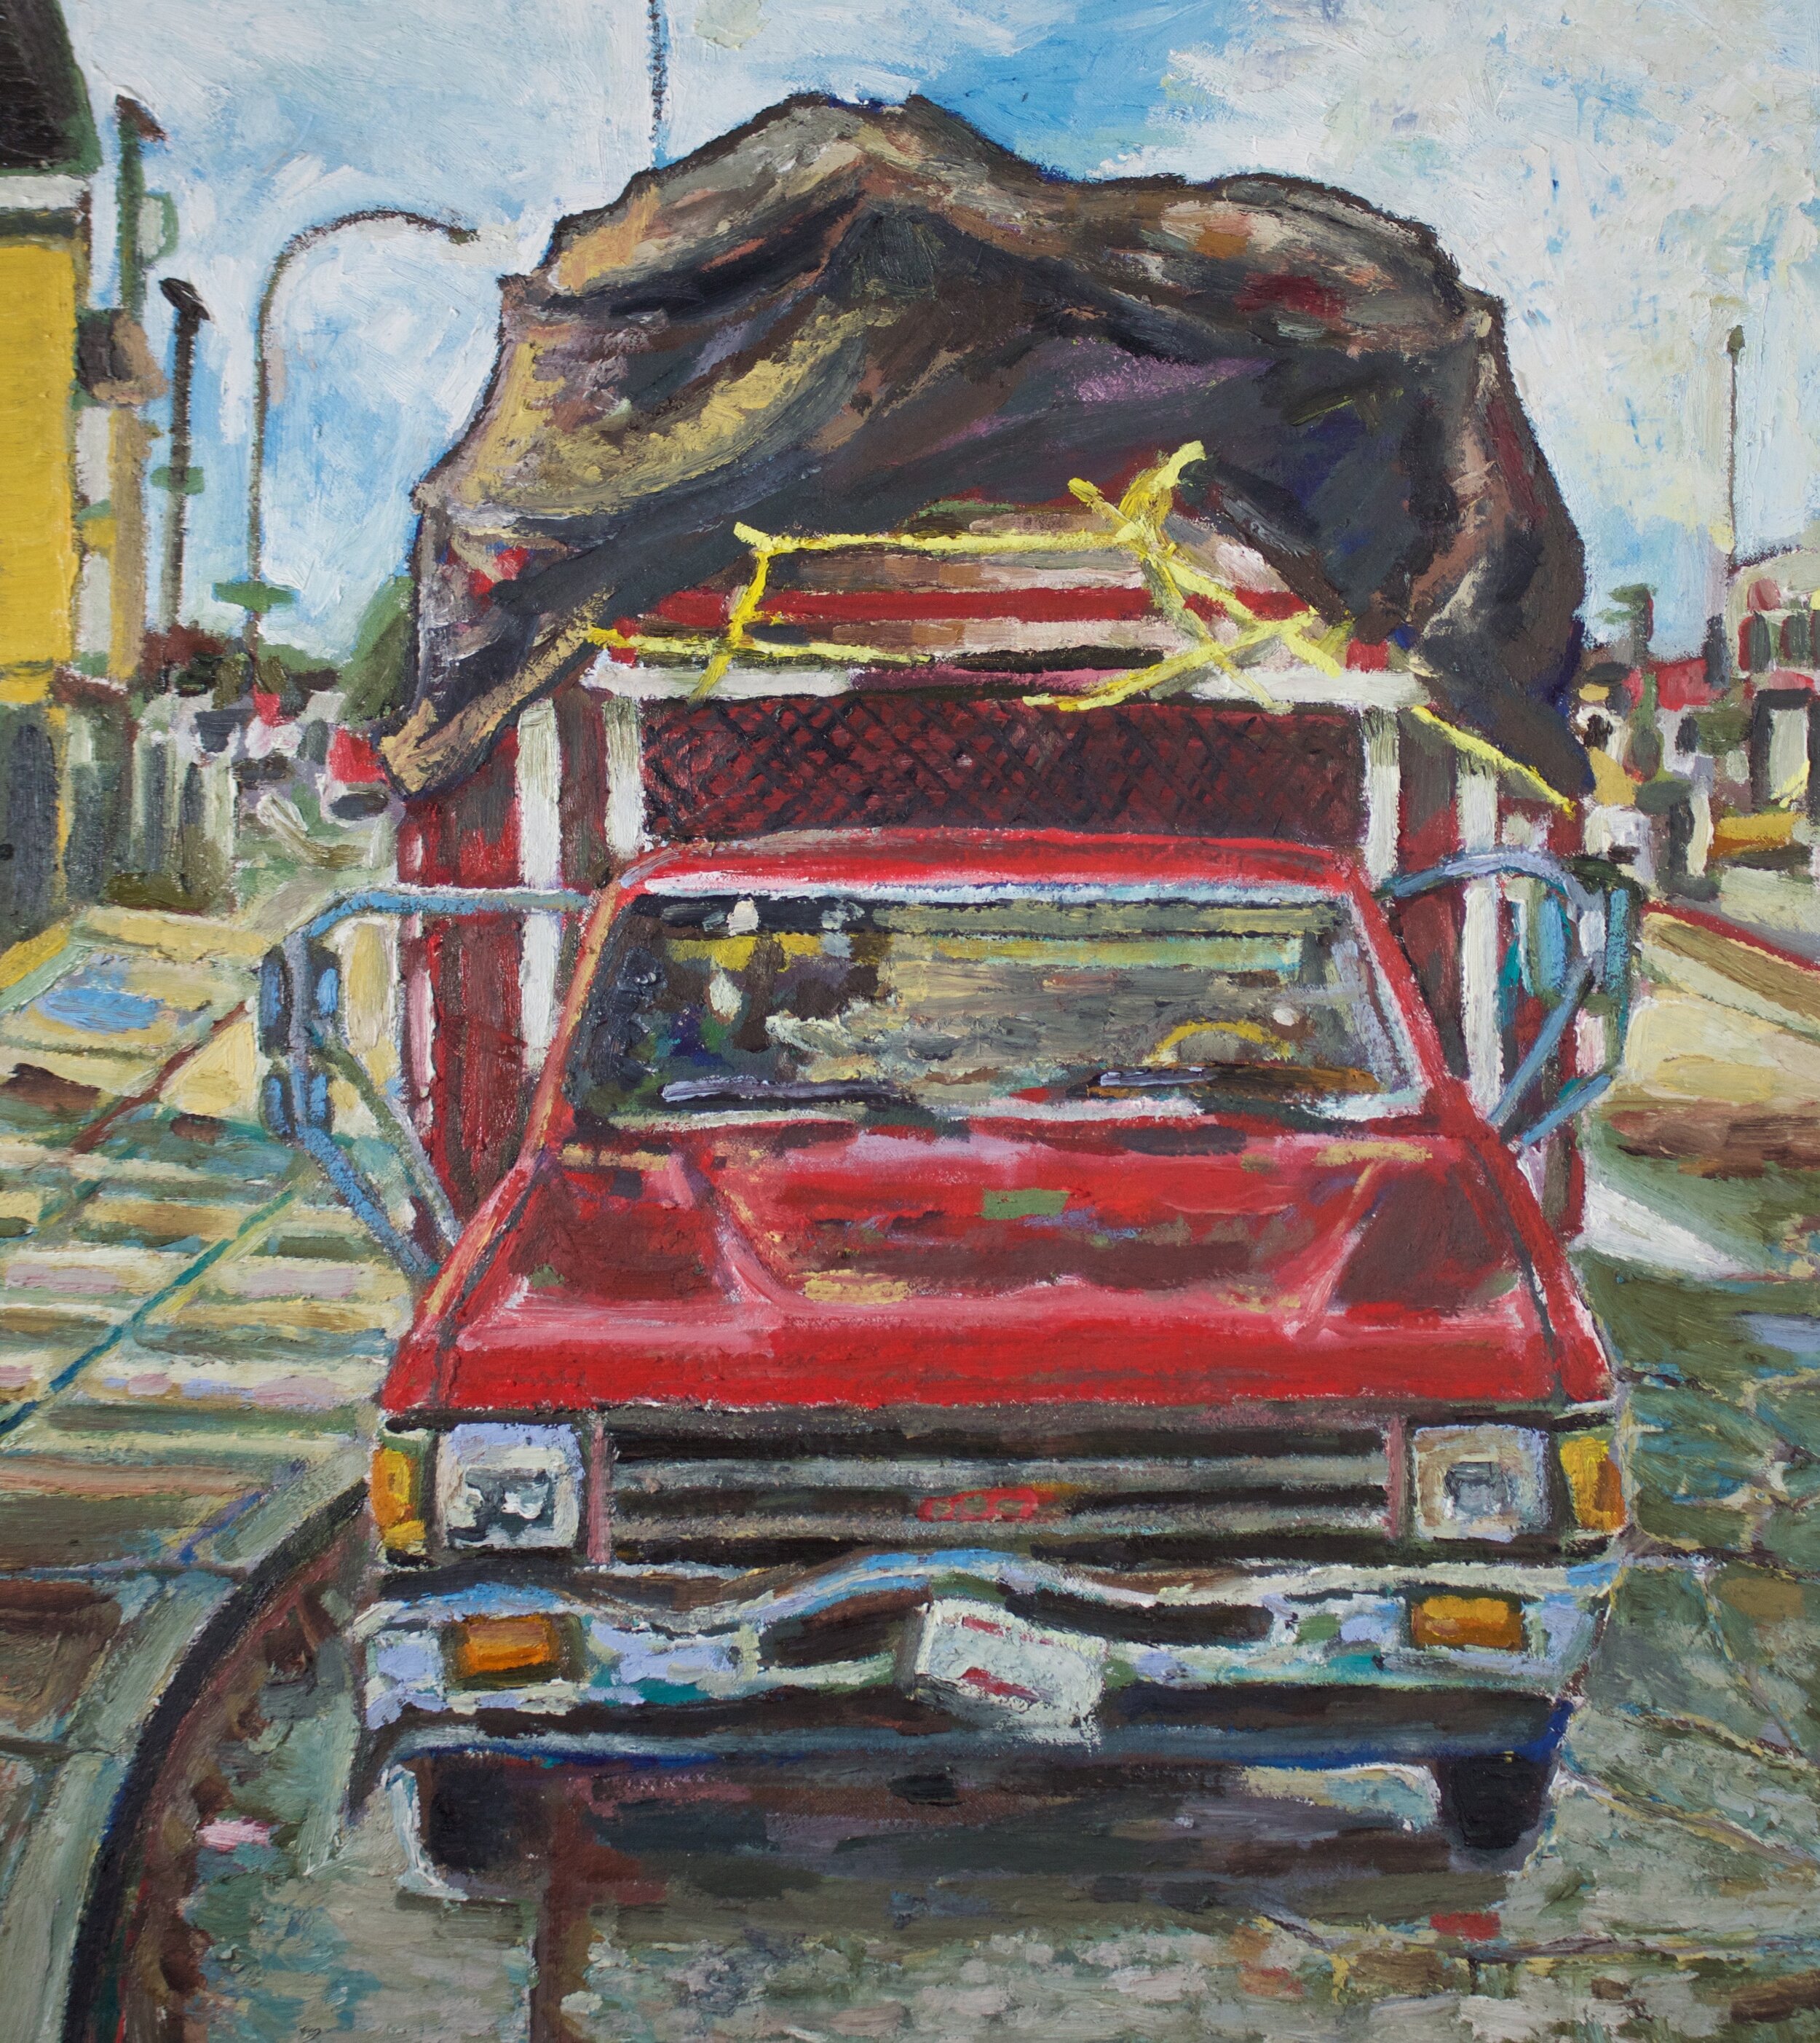 Toyota .oil on unstretched canvas. 25x22in. 2020. $500.jpg